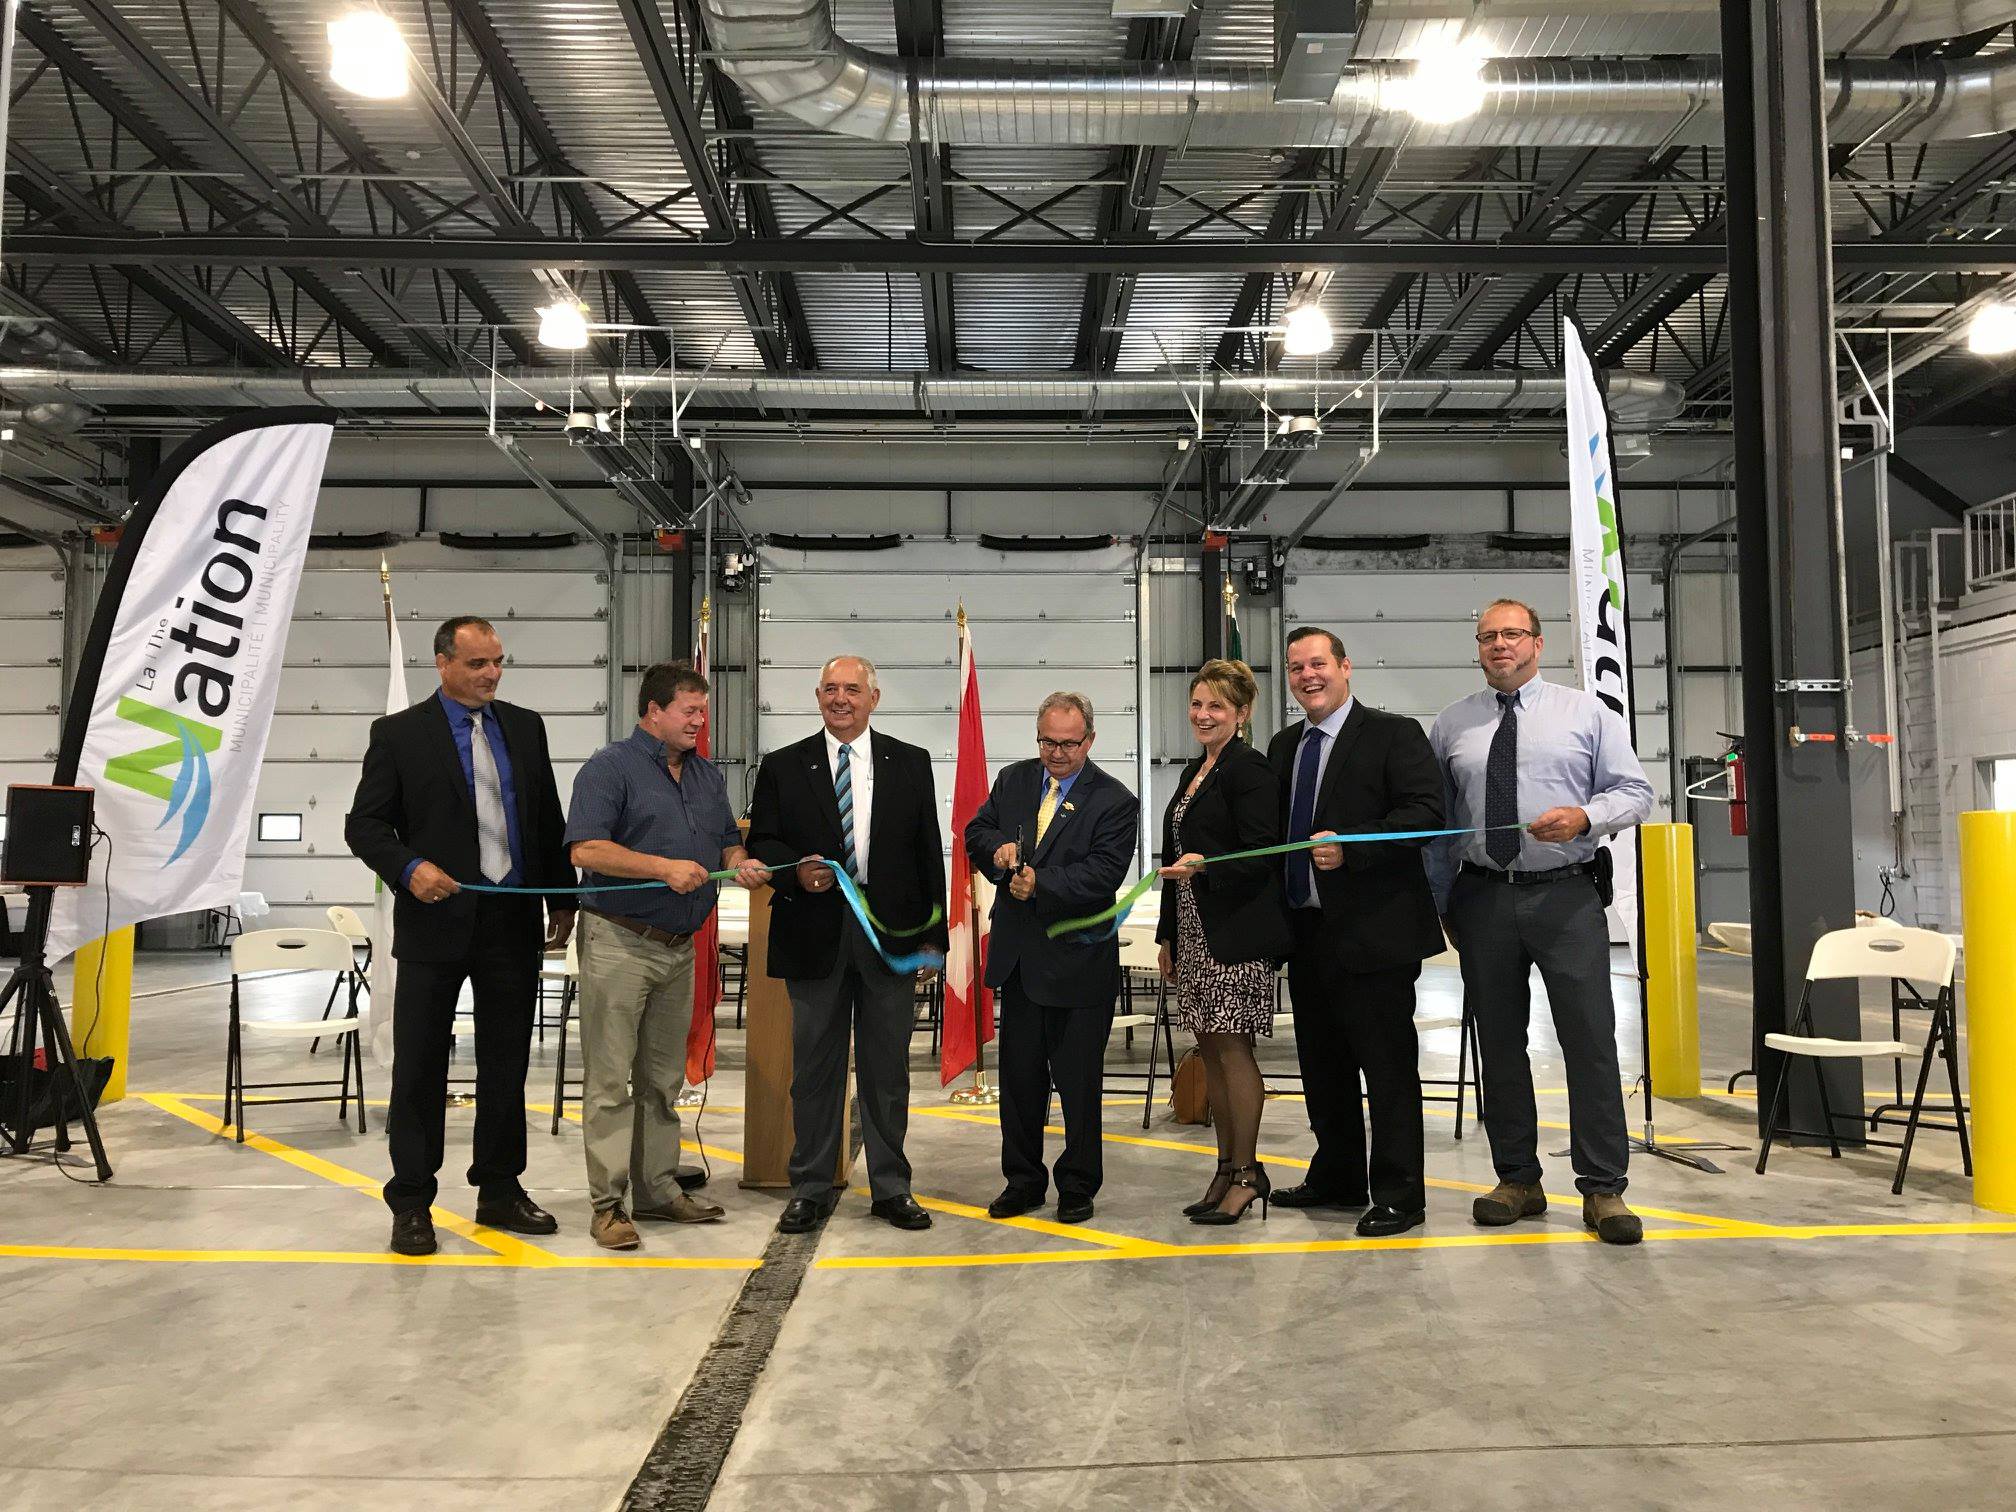 Limoges municipal garage opens, lots for sale soon for business, industry